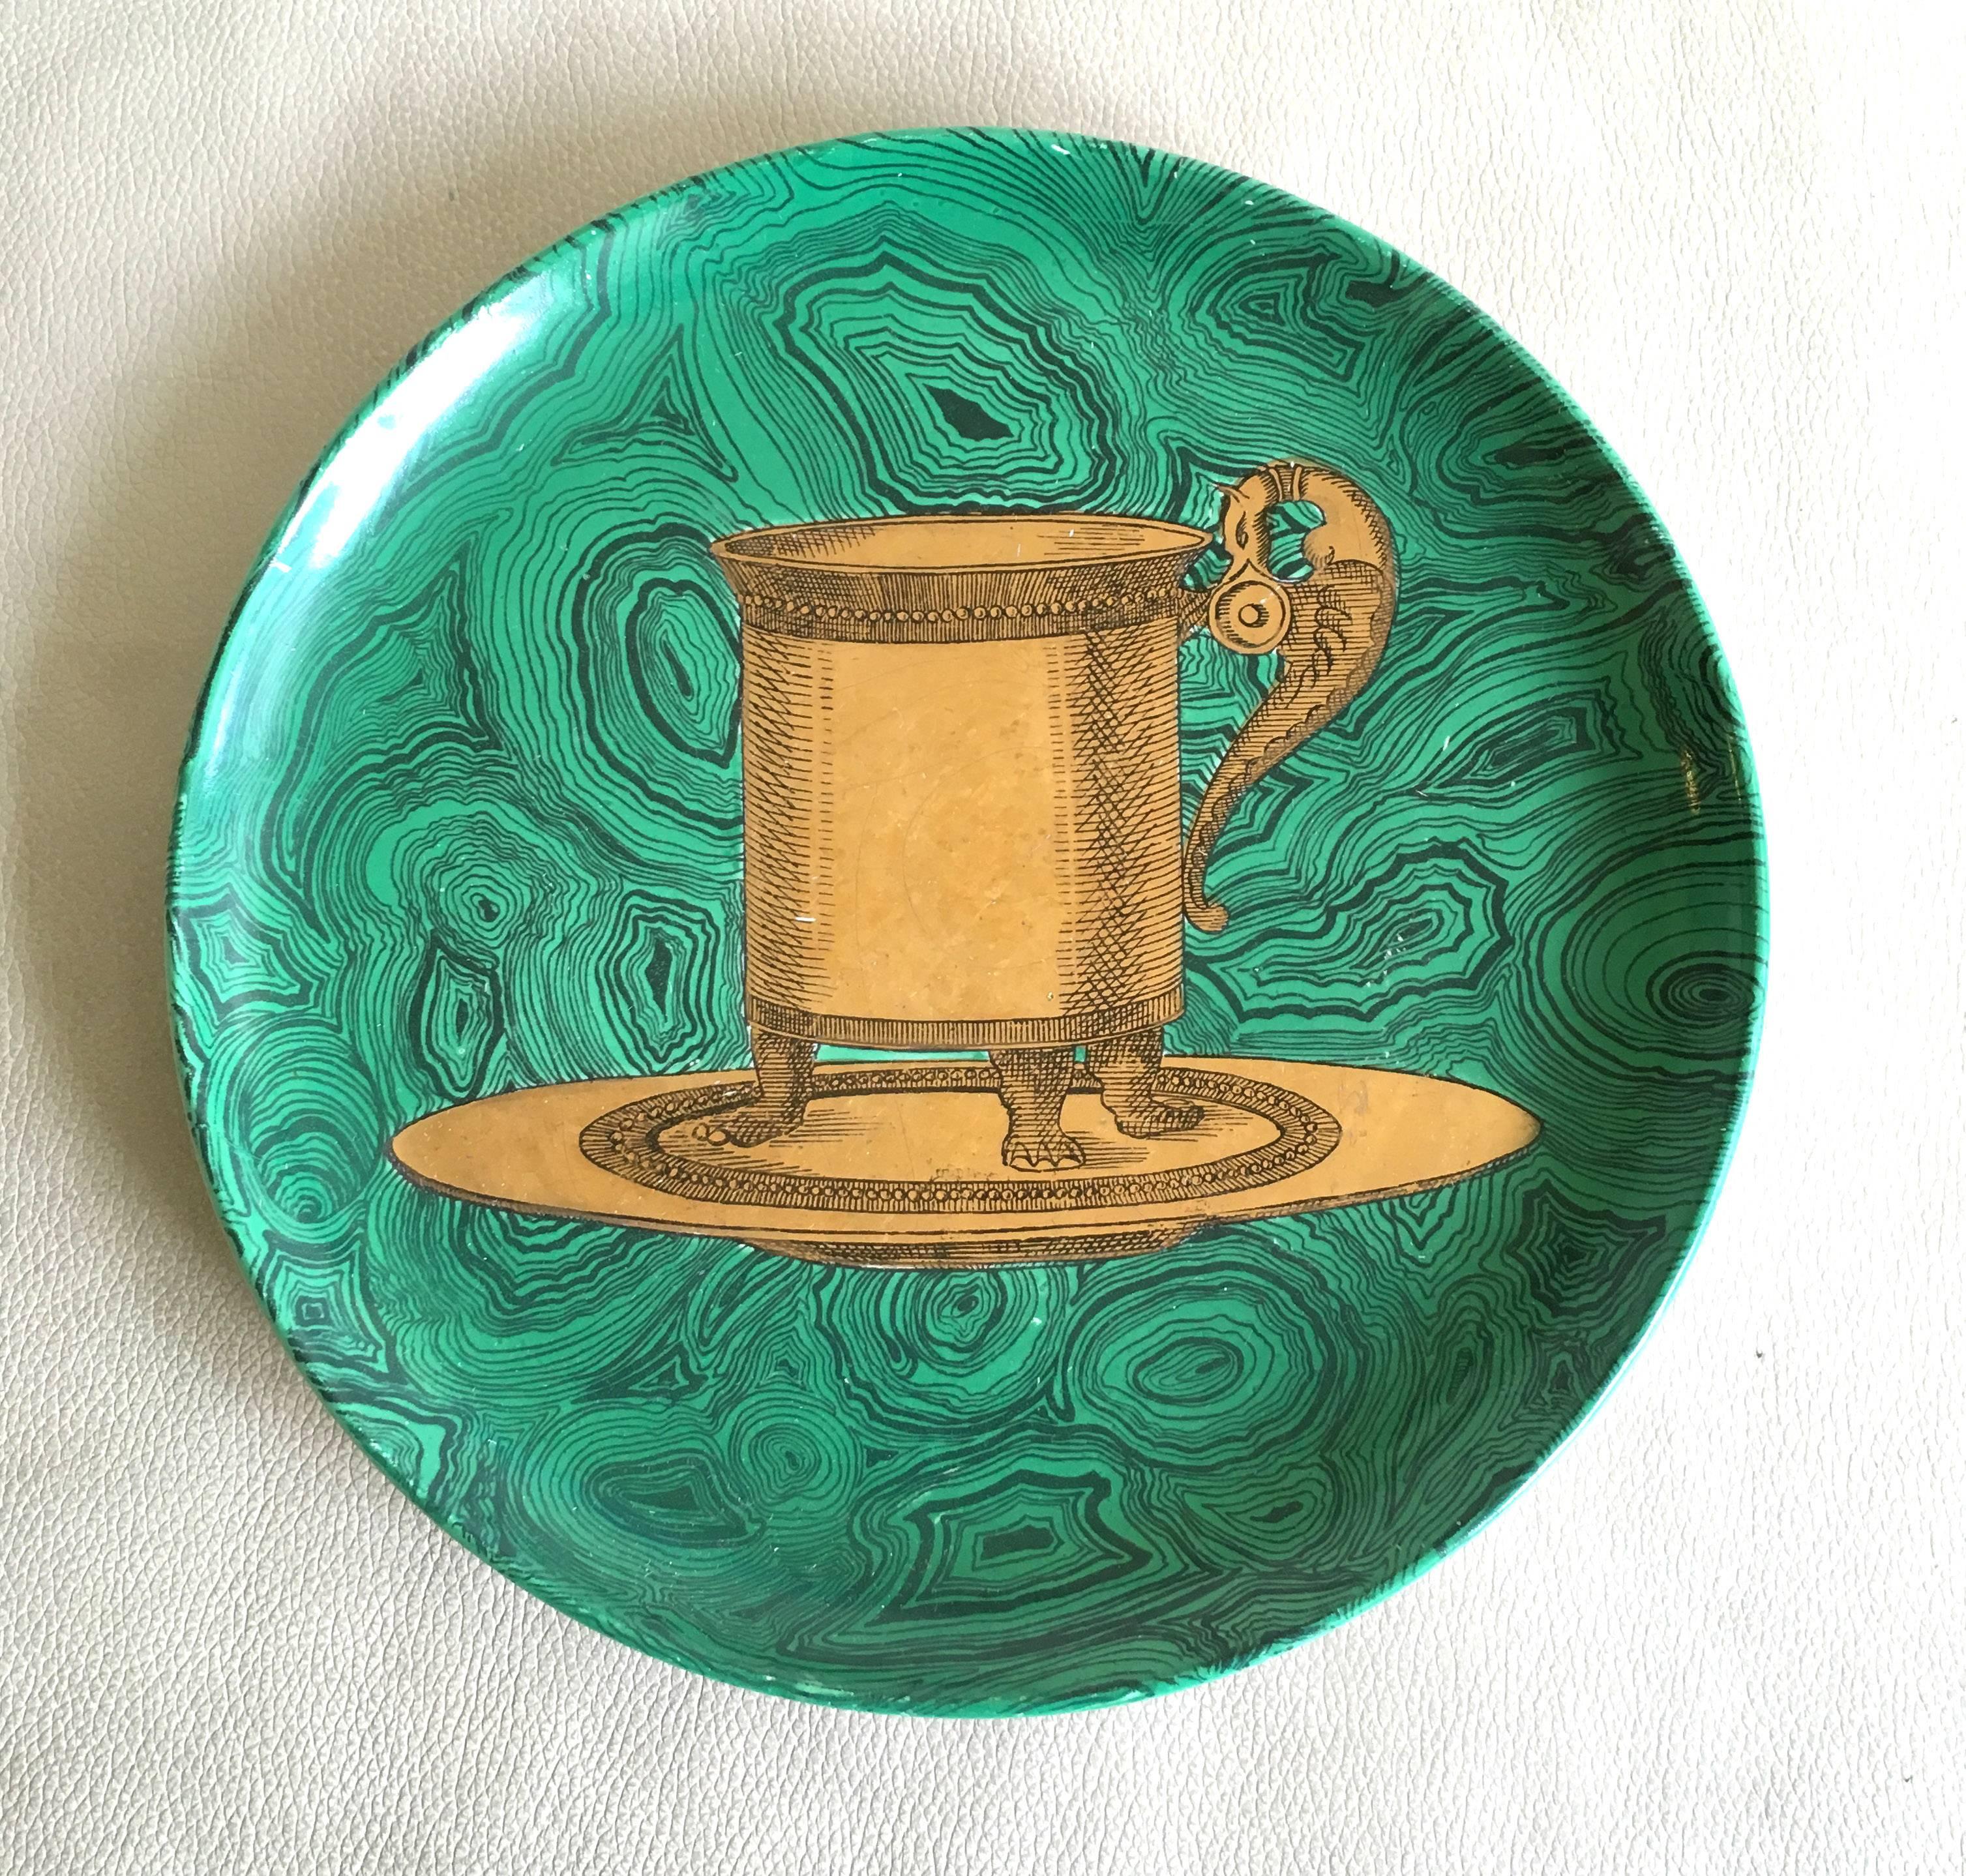 The circular Stoviglie pattern plates by Piero Fornasetti are eary examples from the 1950's.

 The plates are each painted in gilt with a different painting of table accessories on a malachite ground 

The subjects are a water jug (#8), A soup